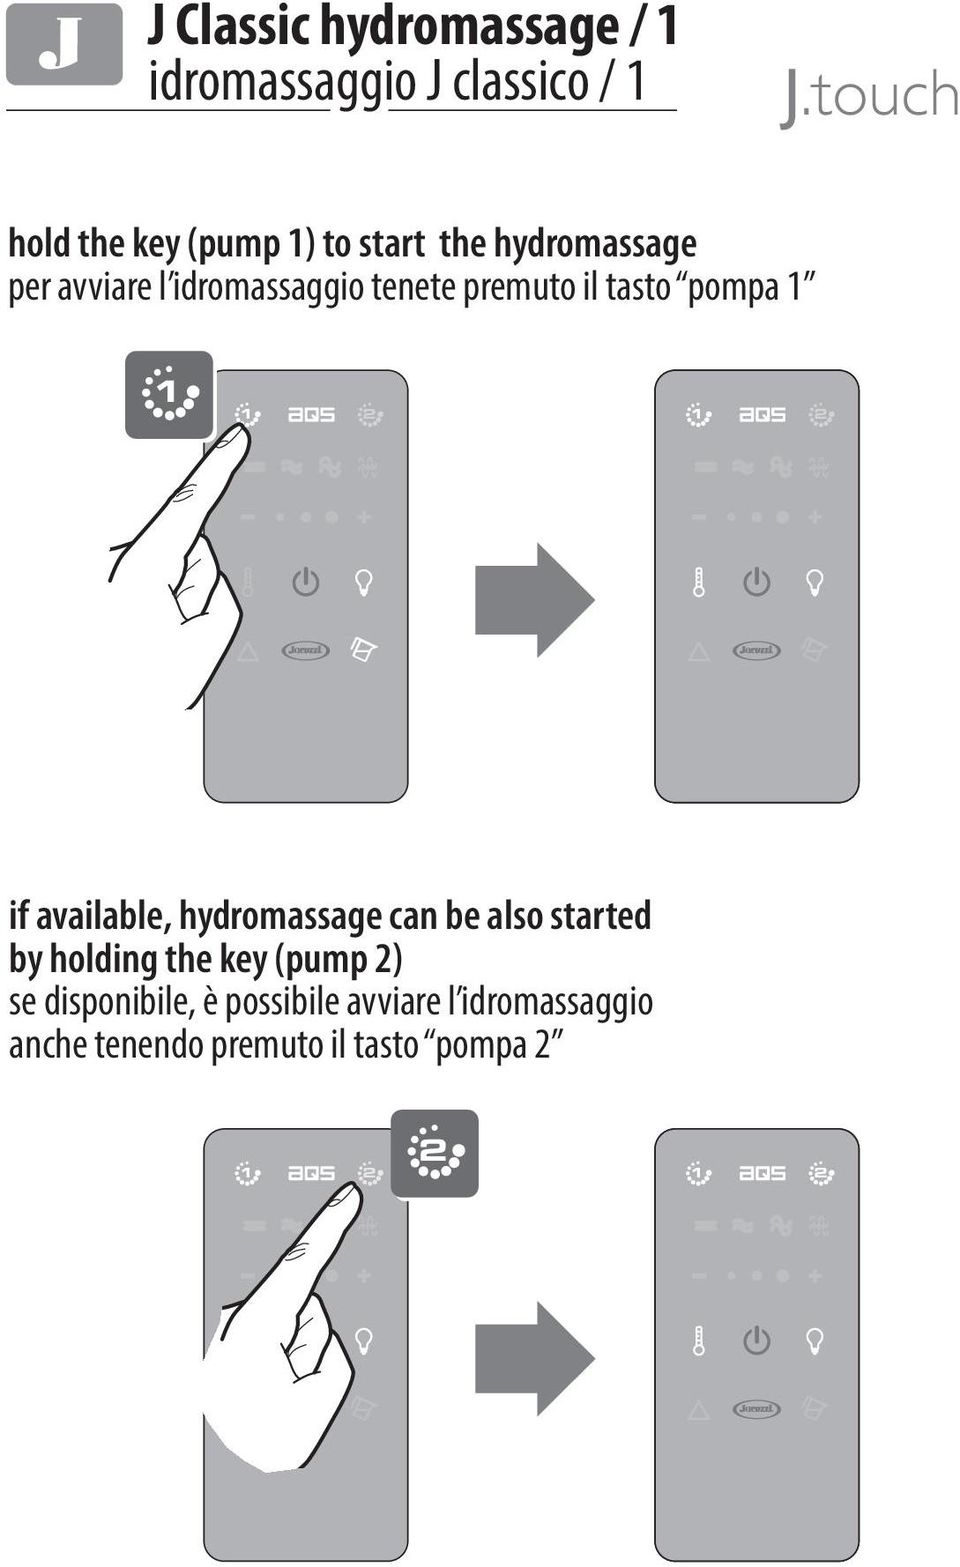 1 2 if available, hydromassage can be also started by holding the key (pump 2) se